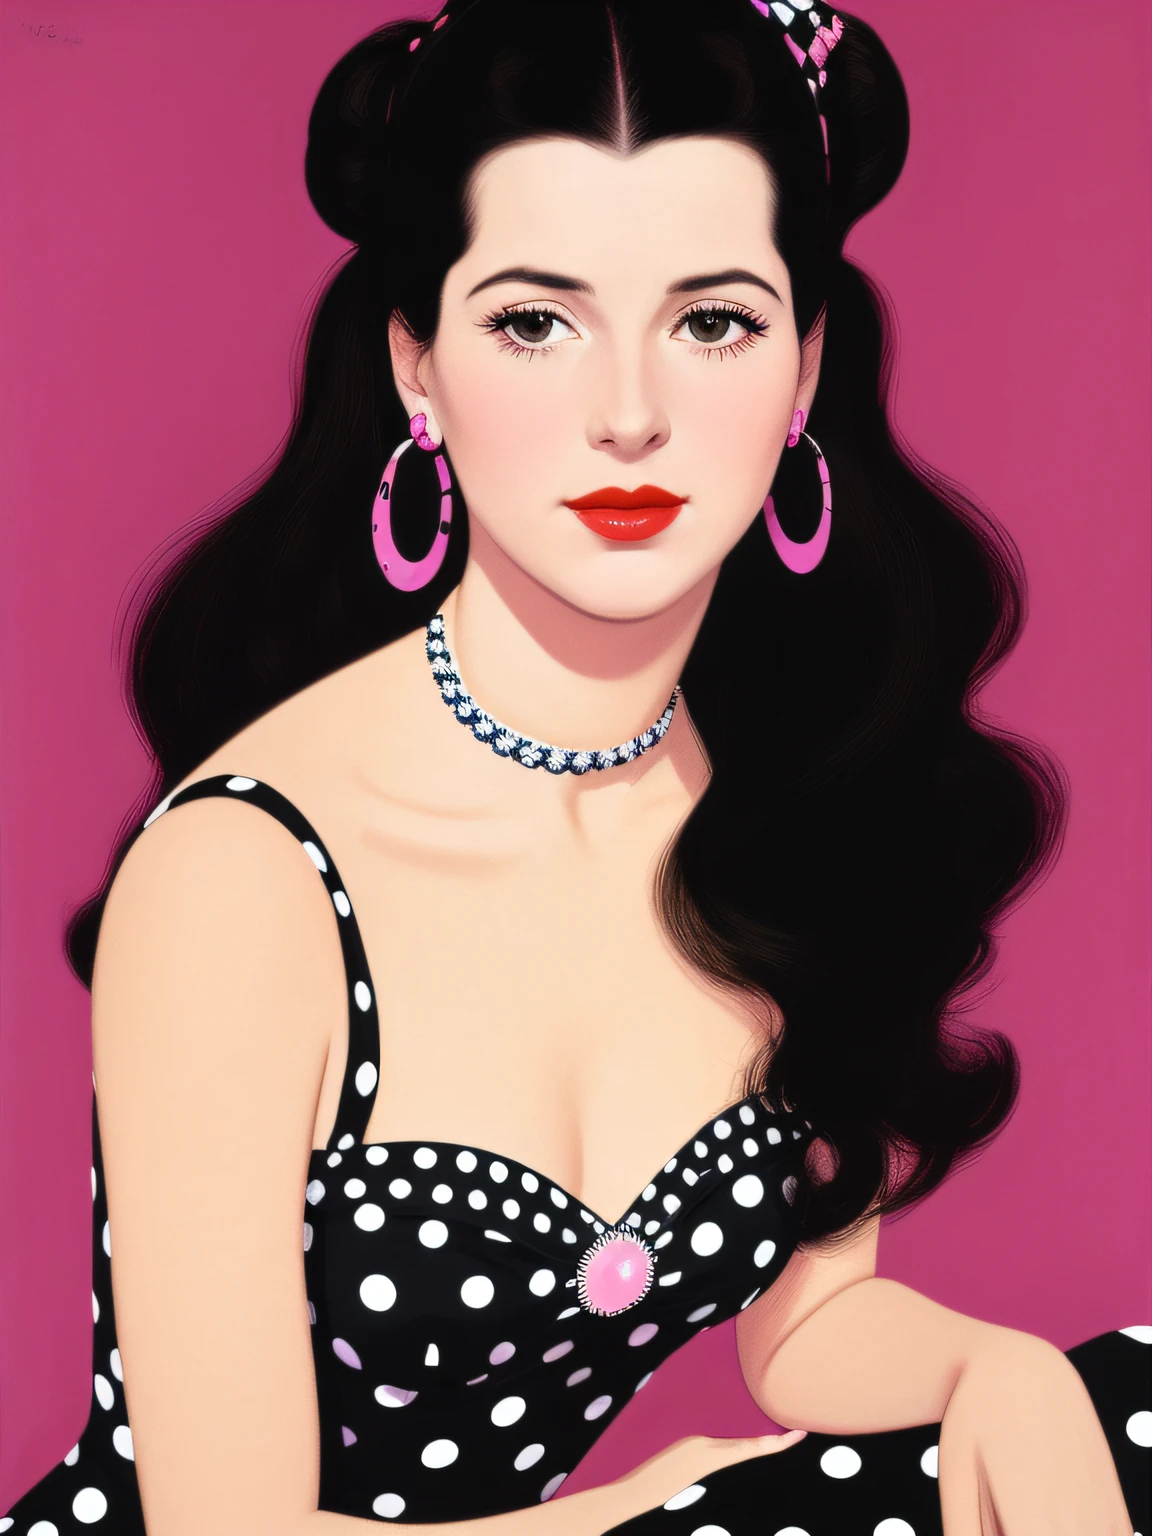 Polka dots on background　One sobbed woman　Wearing pink lipstick and small black earrings、In the axis of light、　America in the 70s　Mary Cassatt、patrick nagel、Looking at the camera with cynicism((Film noir))Portrait painting